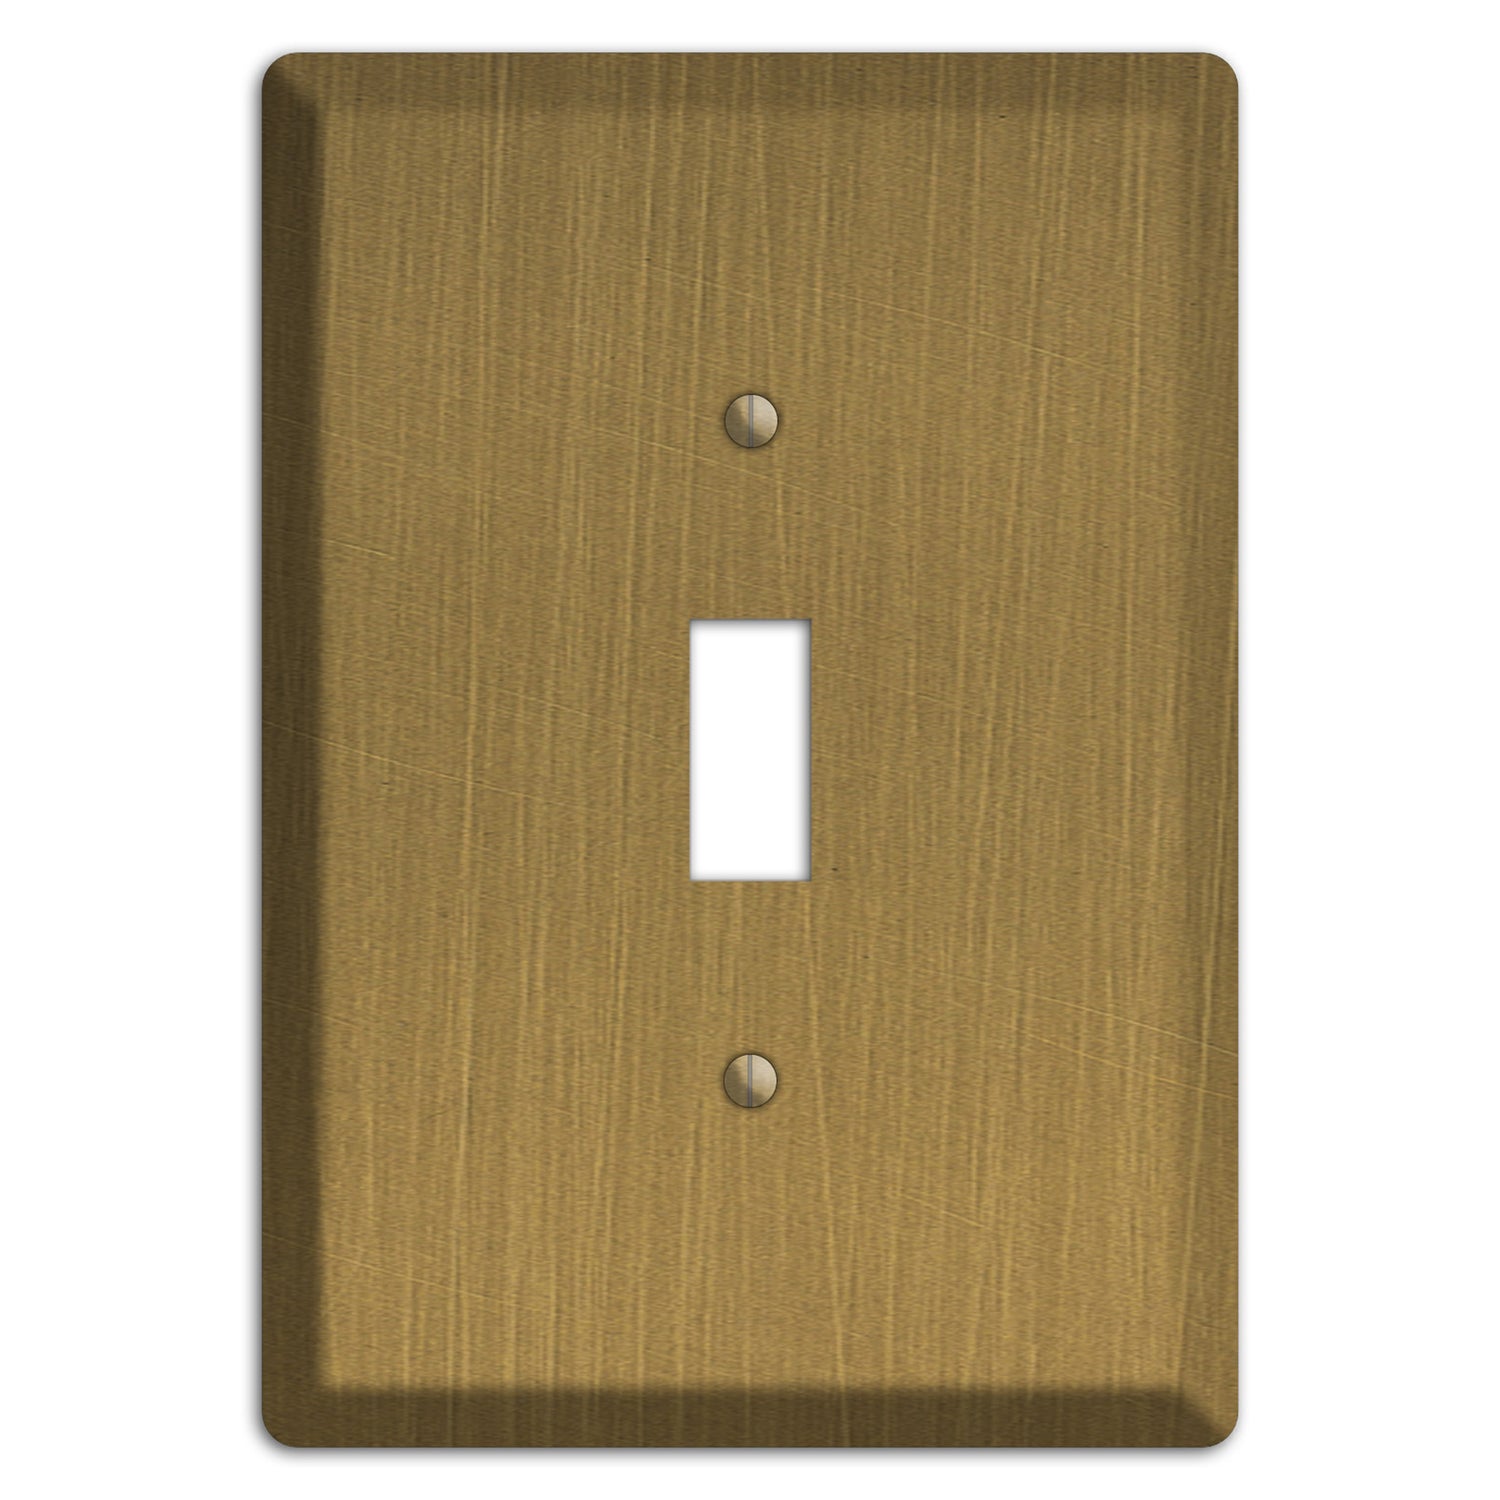 Antique Brushed Solid Brass Cover Plates